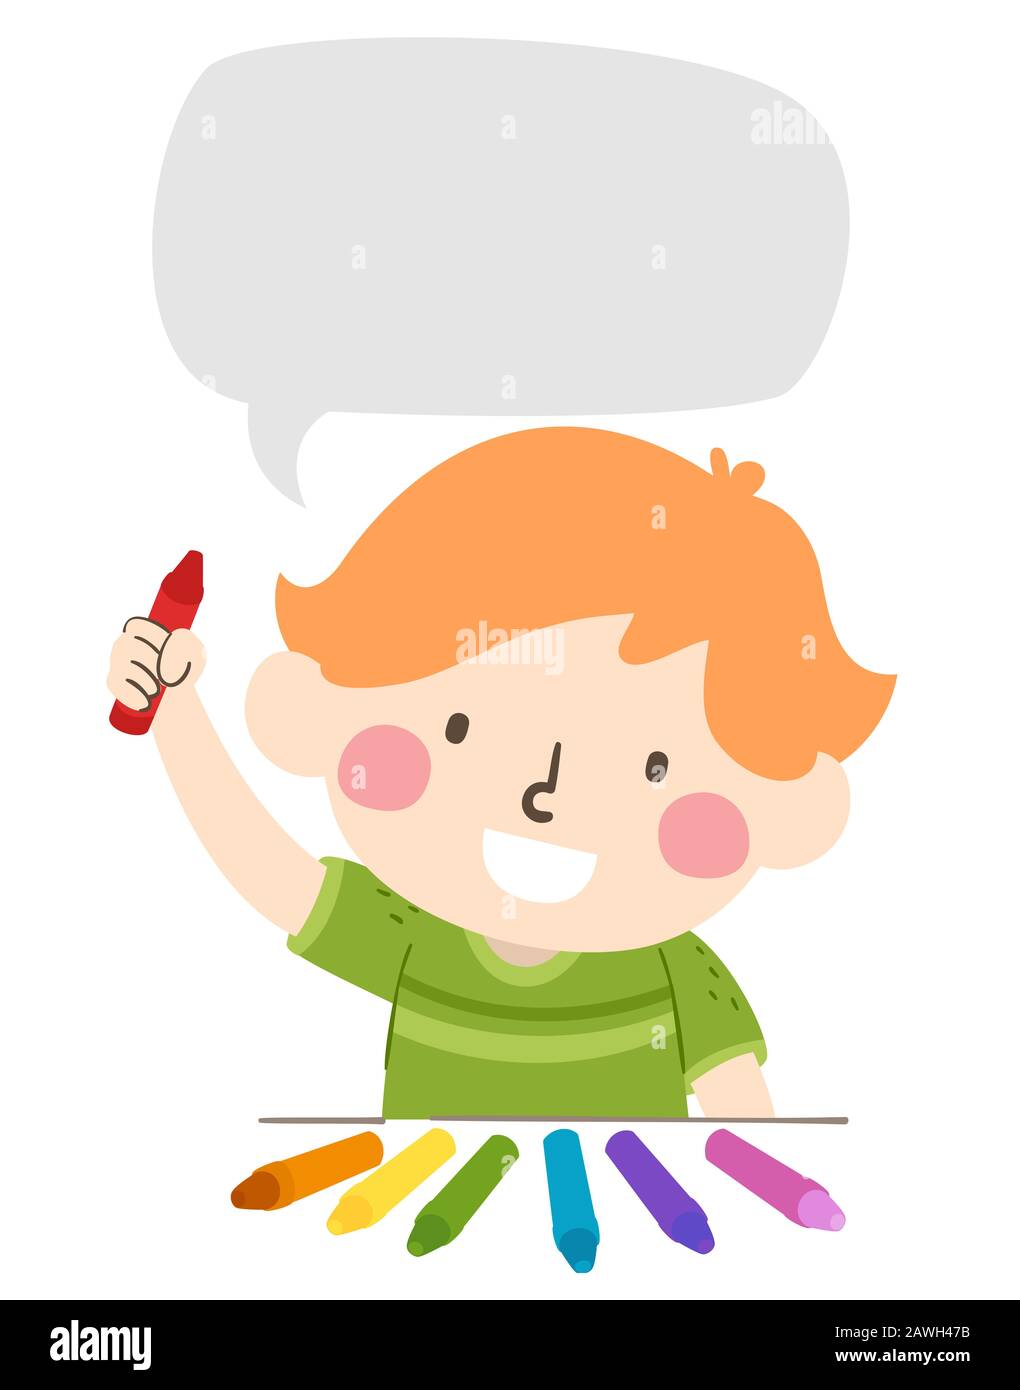 Illustration of a Kid Boy Holding a Crayon Identifying Colors with a Blank Speech Bubble Stock Photo